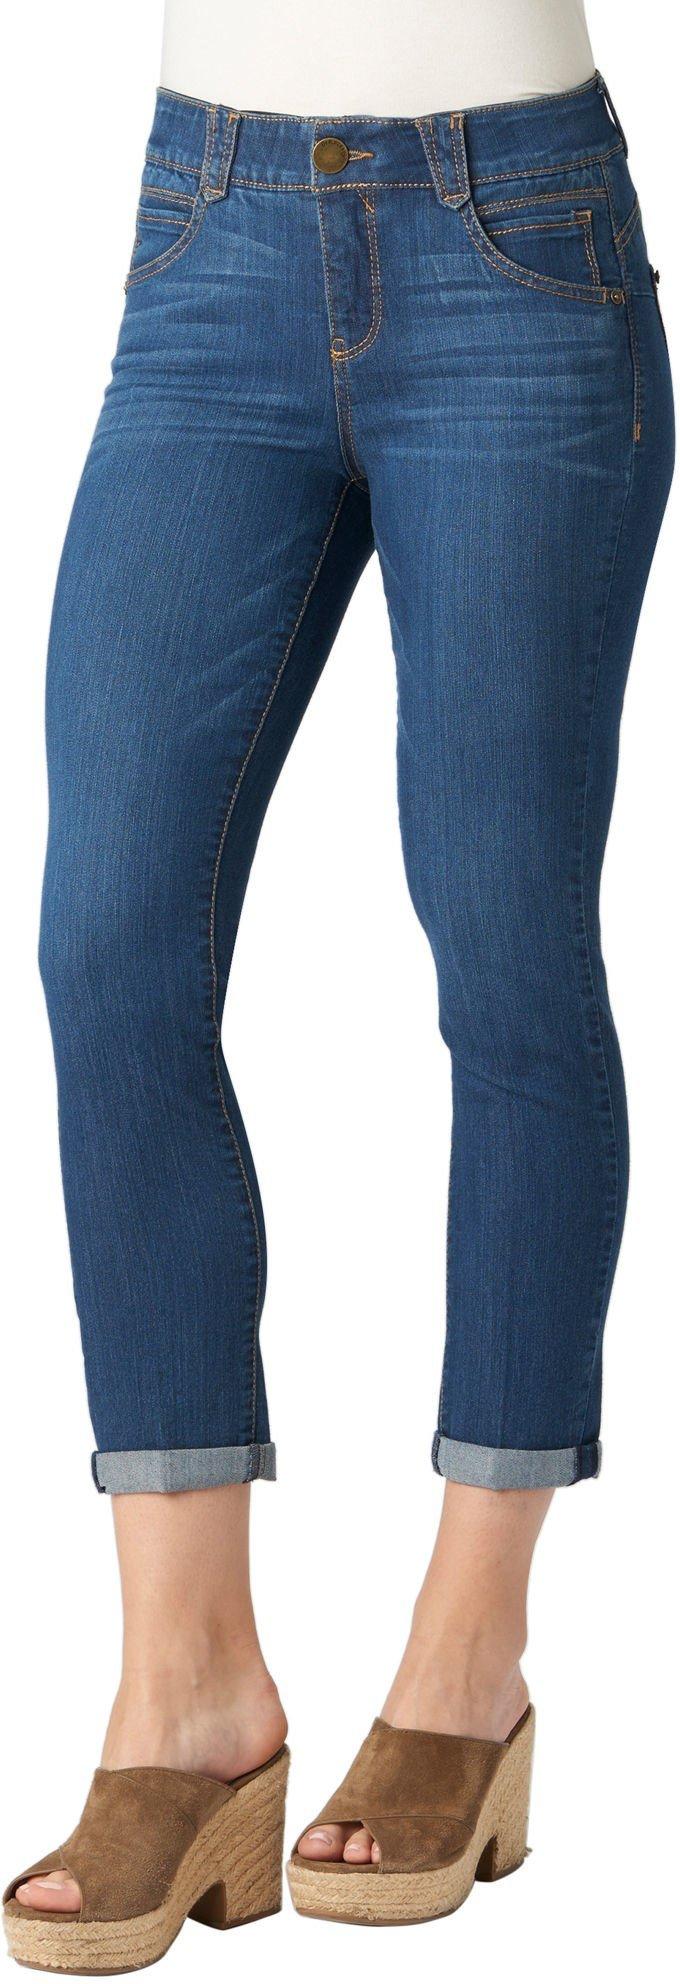 cabela's flannel lined jeans womens